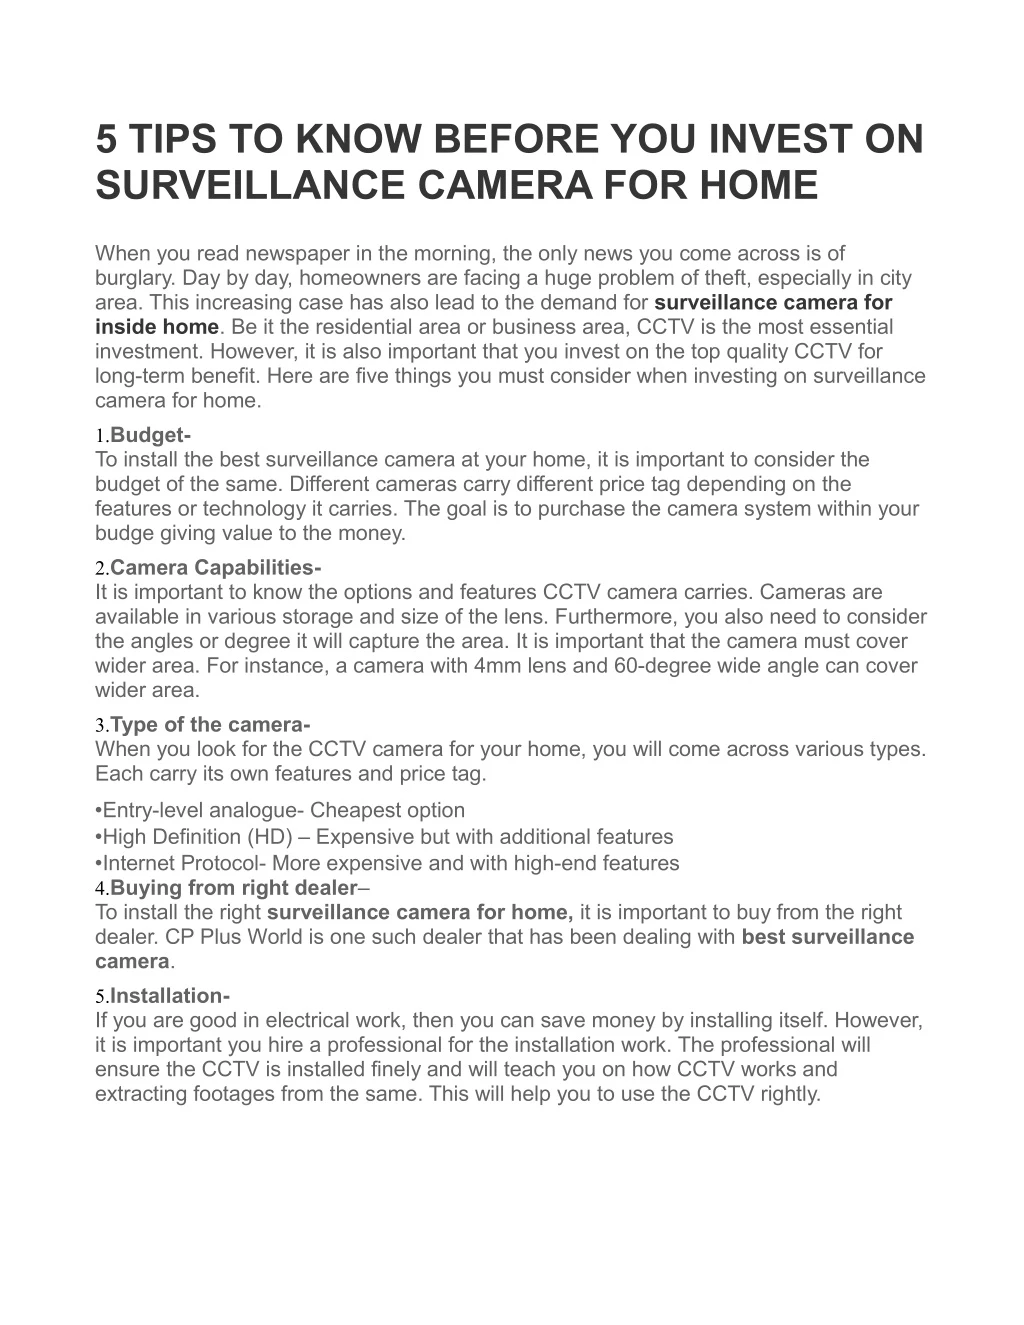 5 tips to know before you invest on surveillance